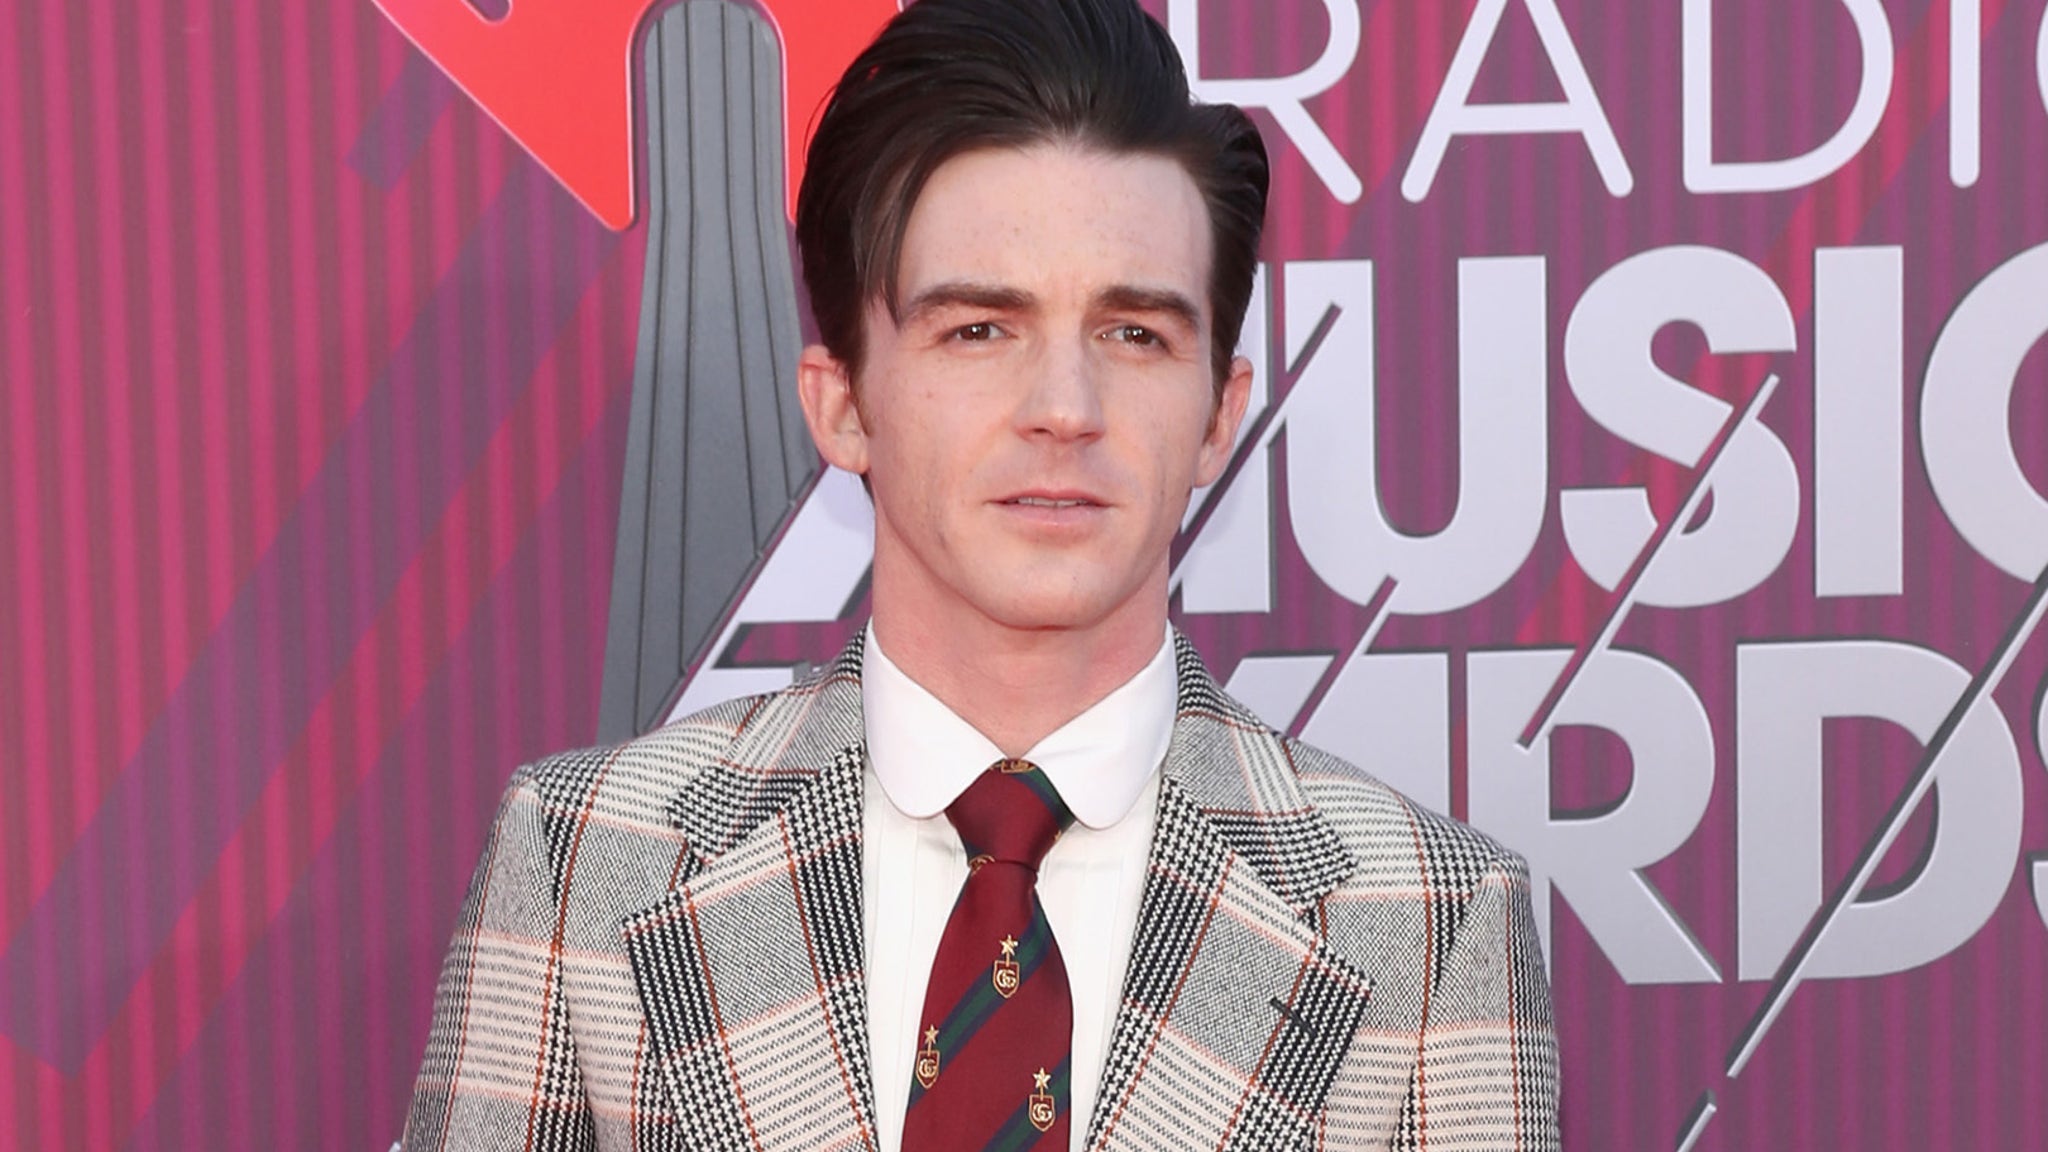 Drake Bell on How He Agreed to Share His Story of Abuse, Nickelodeon's 'Fairly Empty' Response